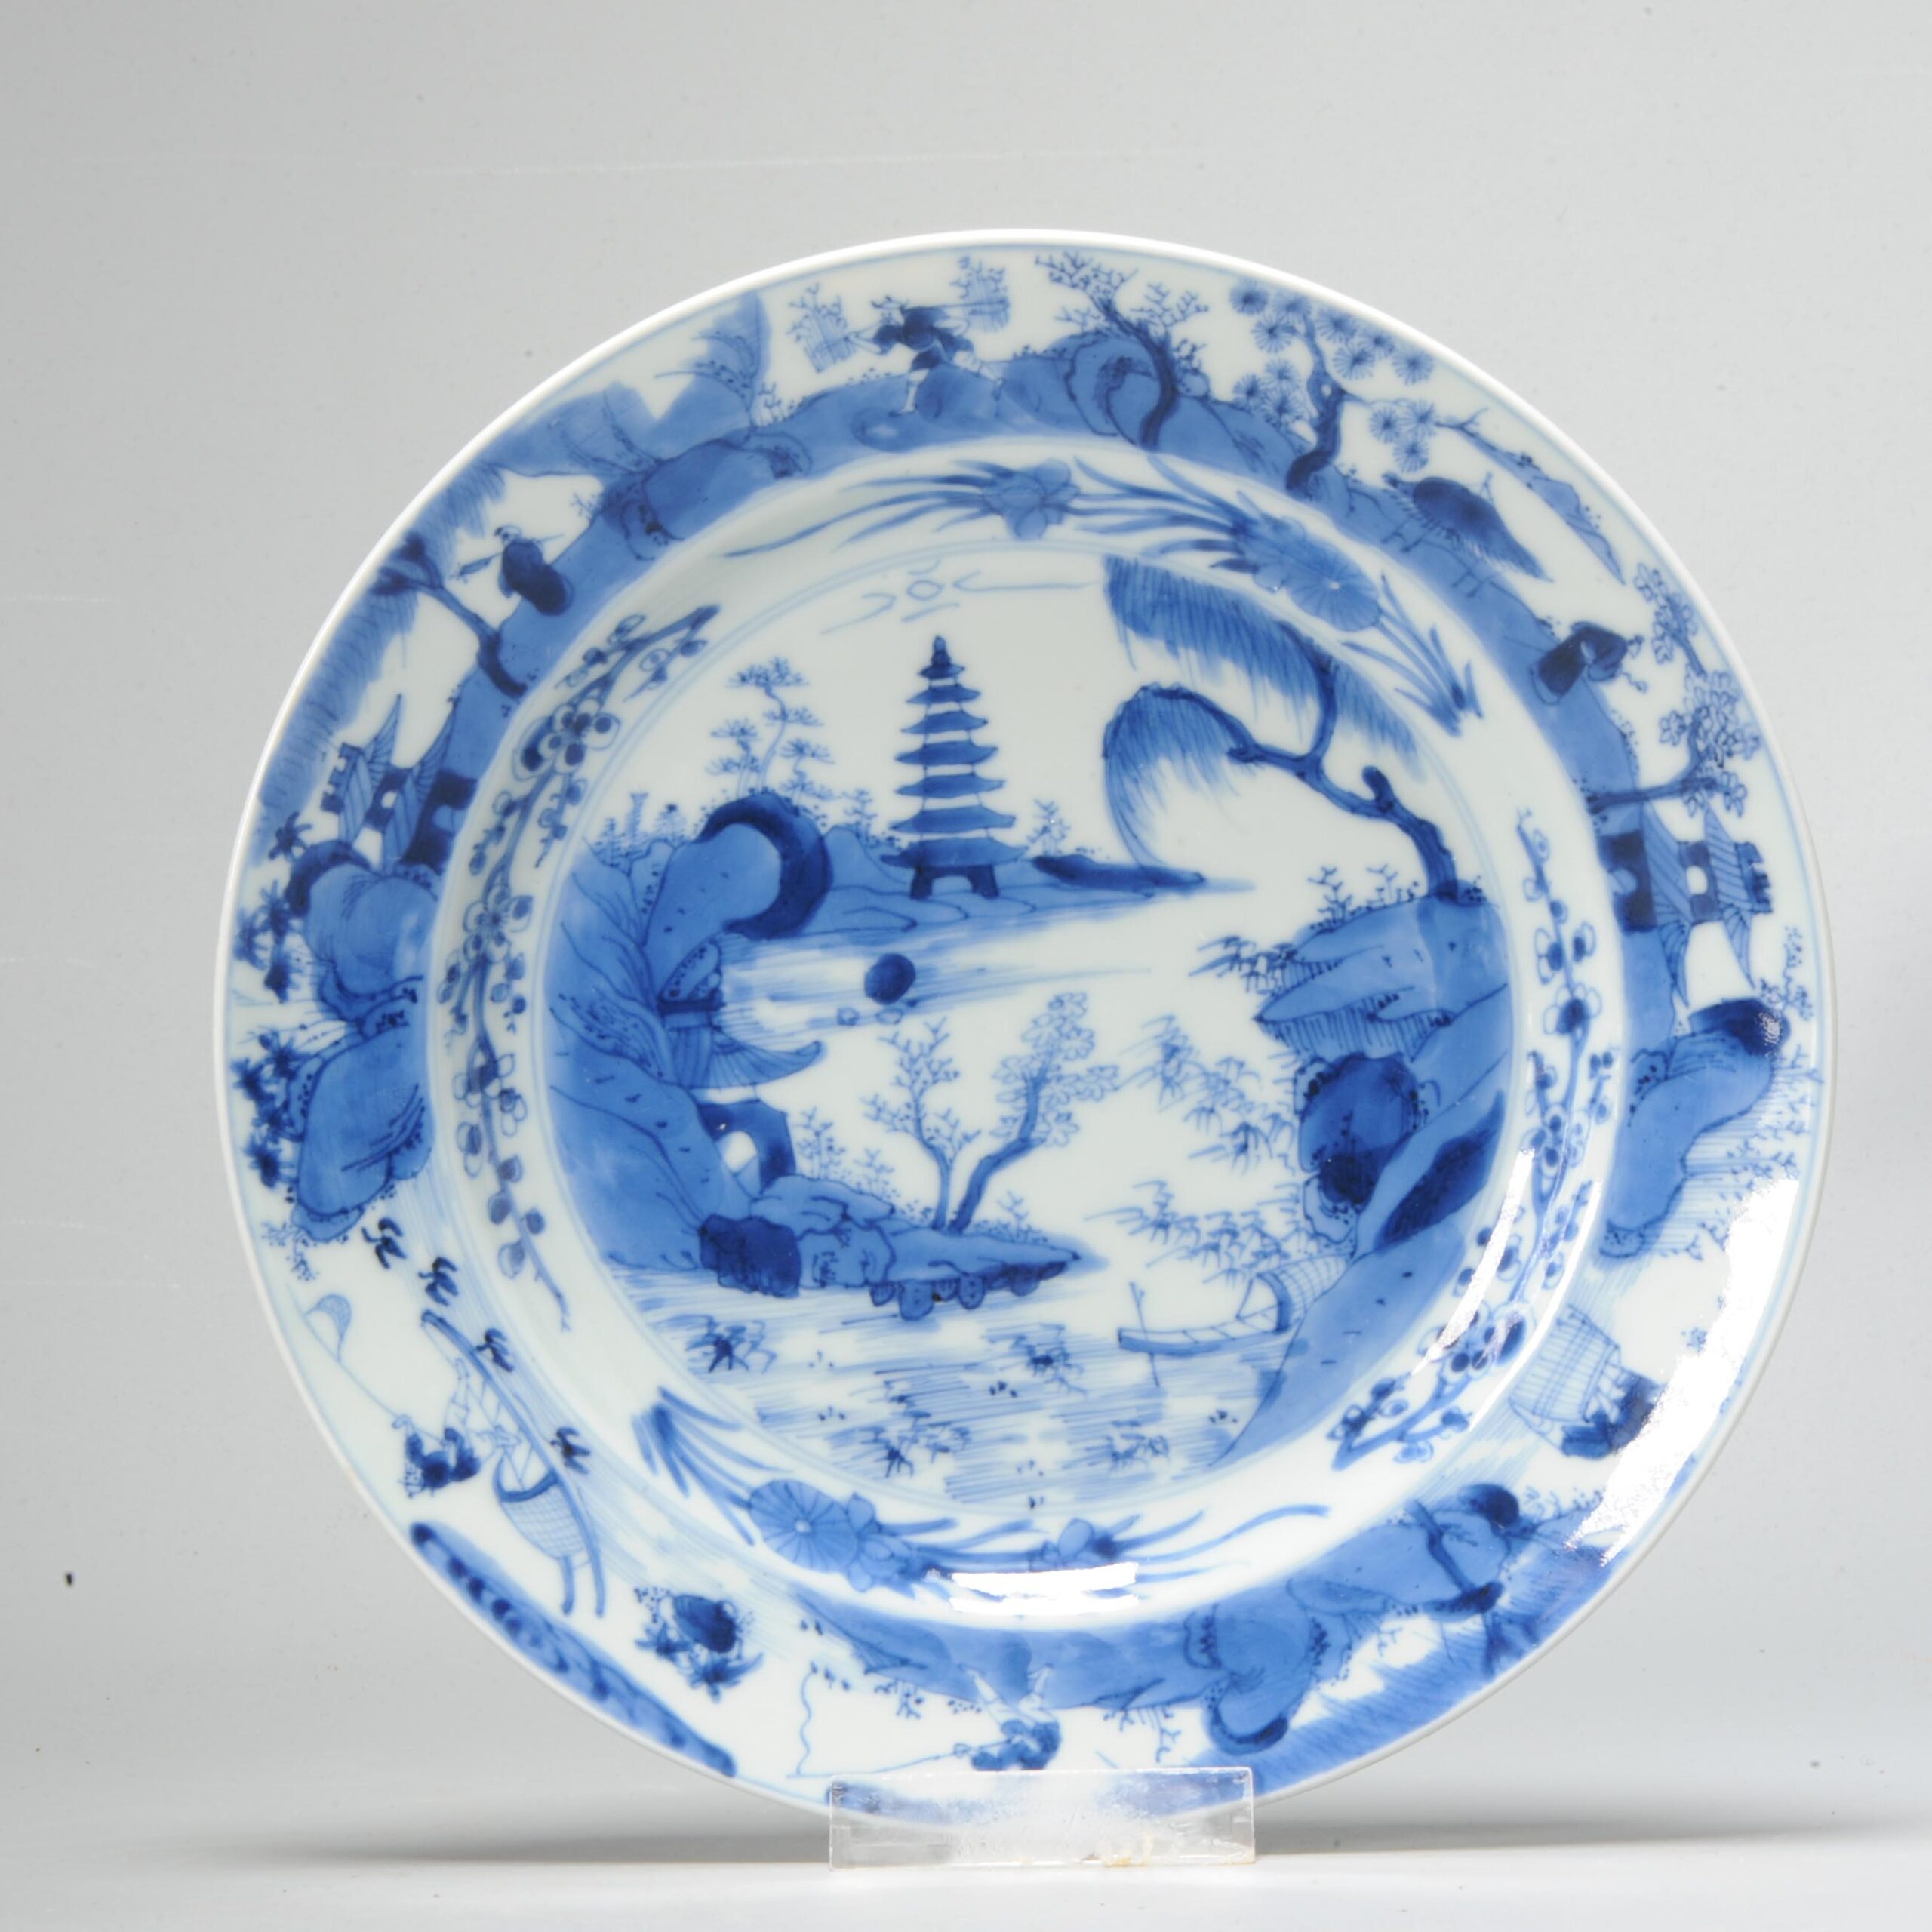 1058 Lovely cobalt blue plate with Figures in Landscape. Very much in Ming style